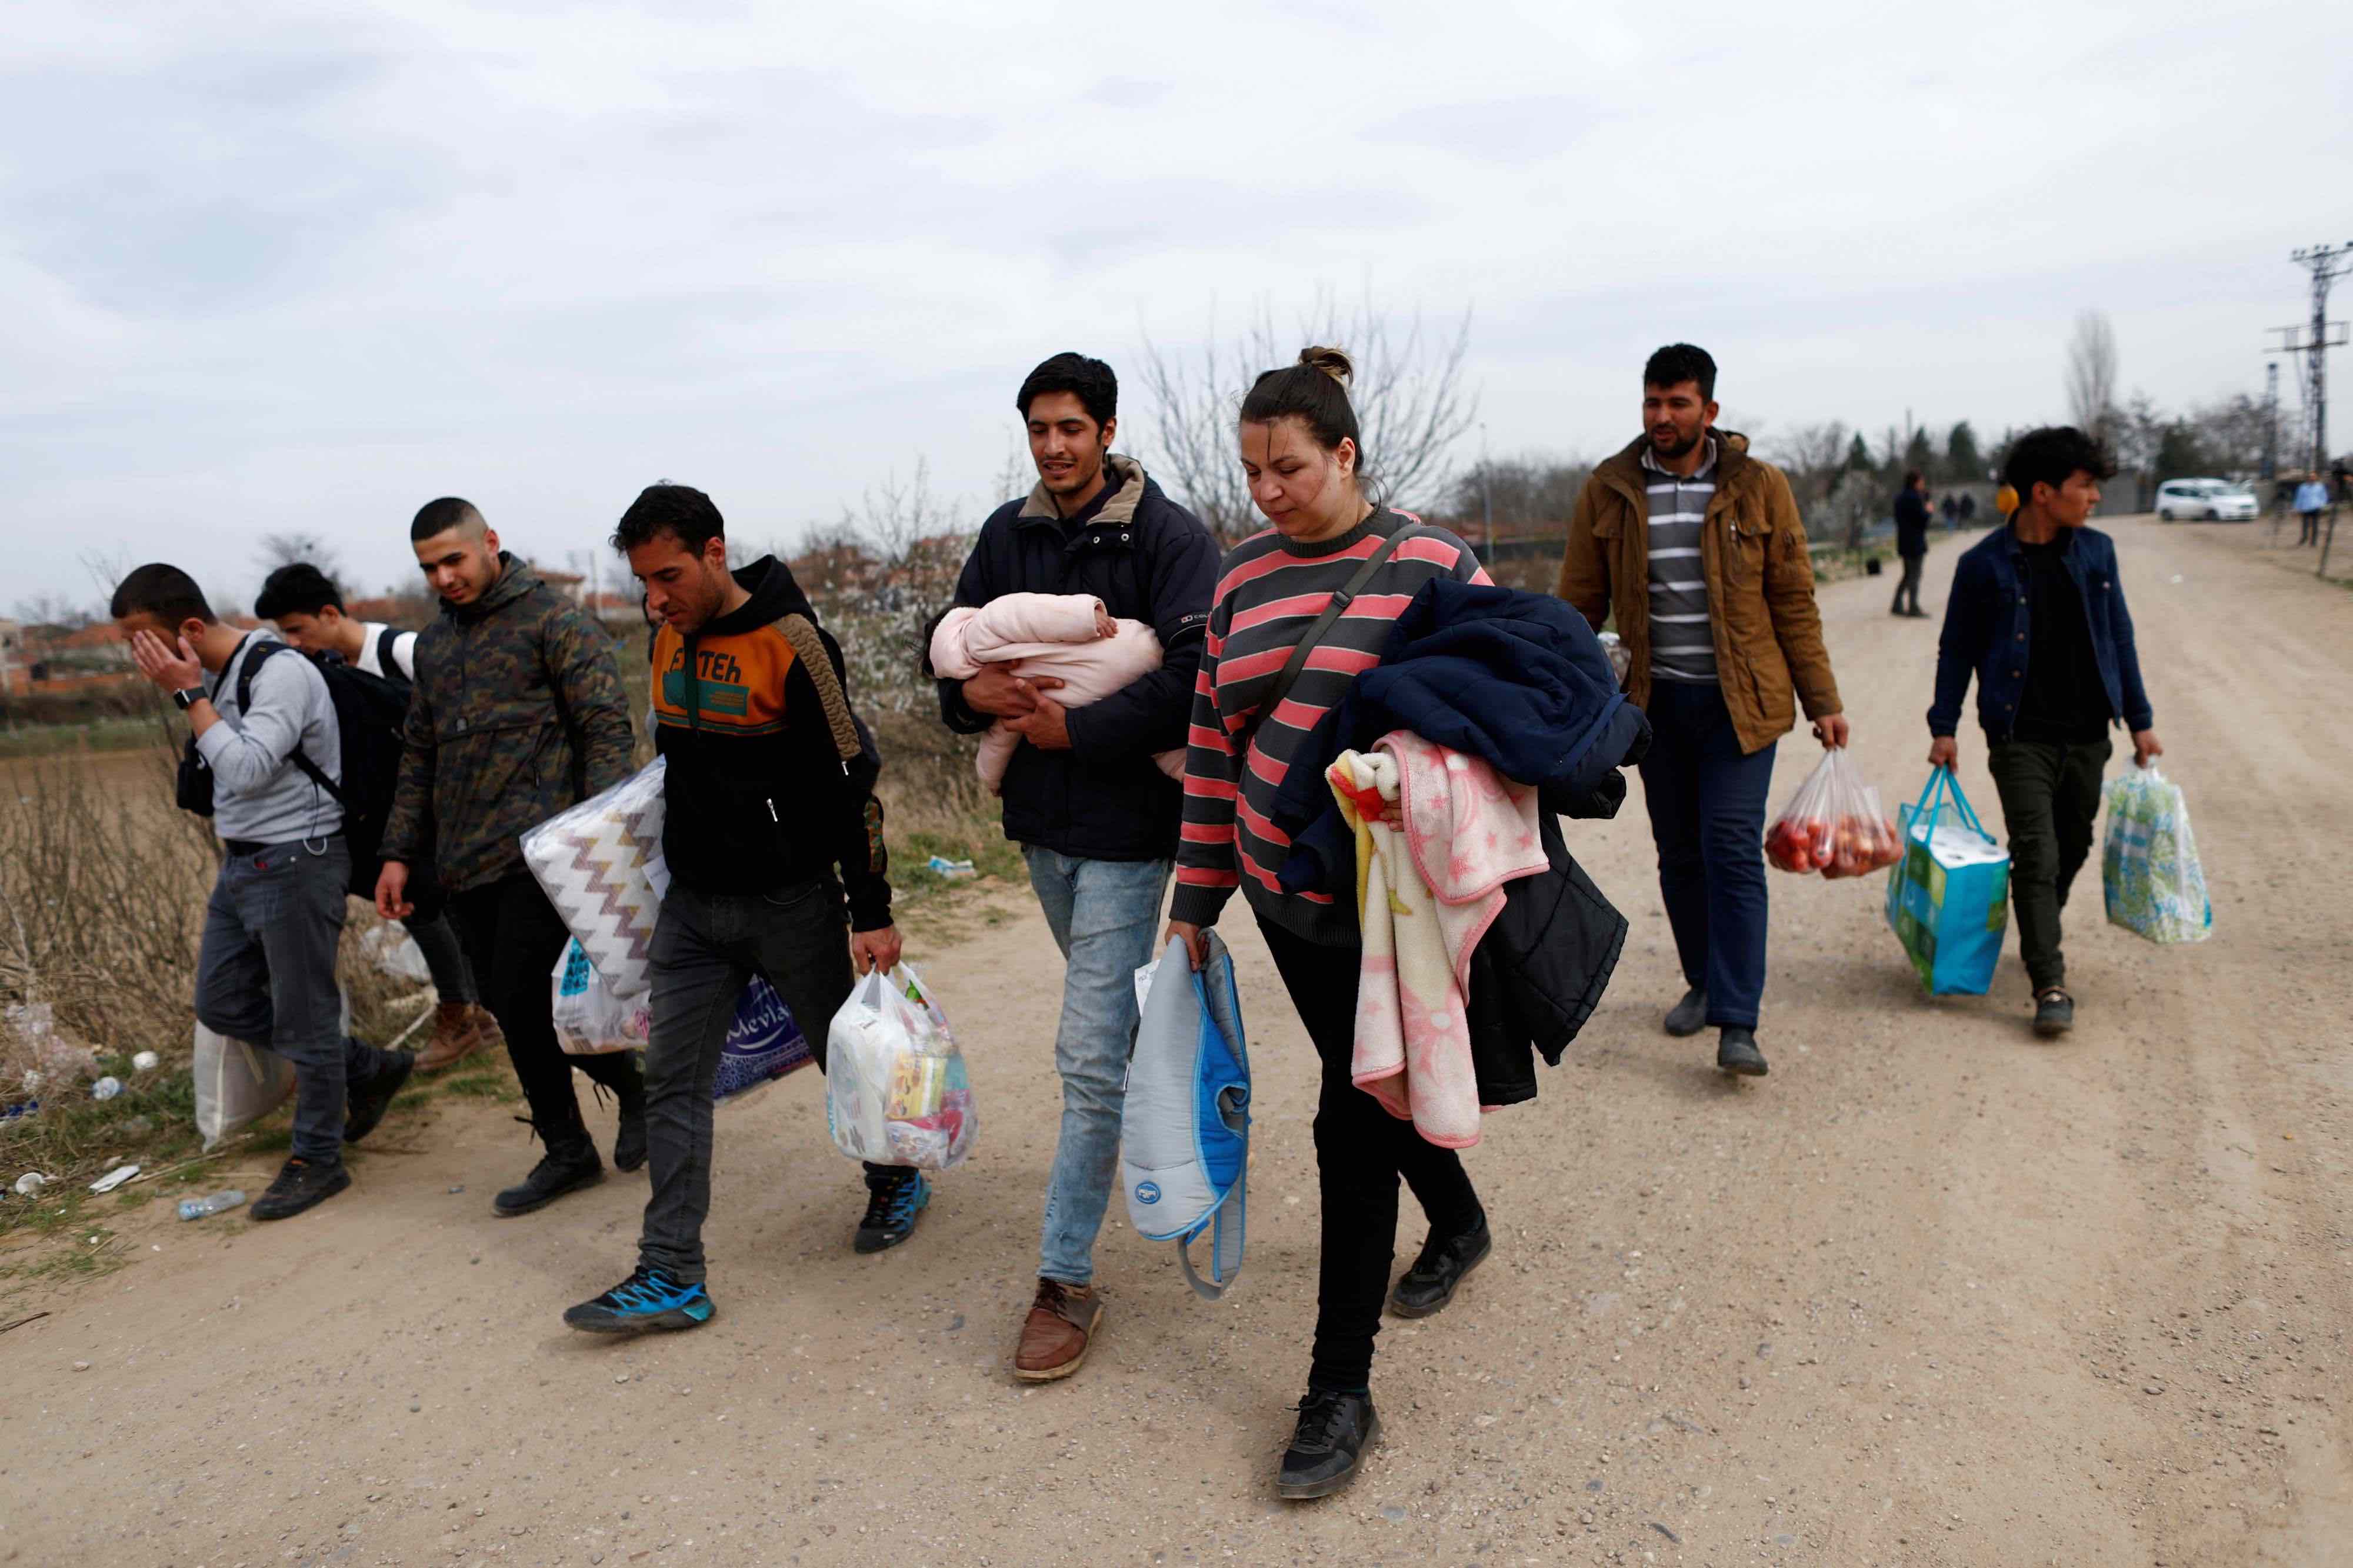 Turkey hosts some 3.6 million refugees from Syria, where its troops are facing off against Russian-backed Syrian government forces